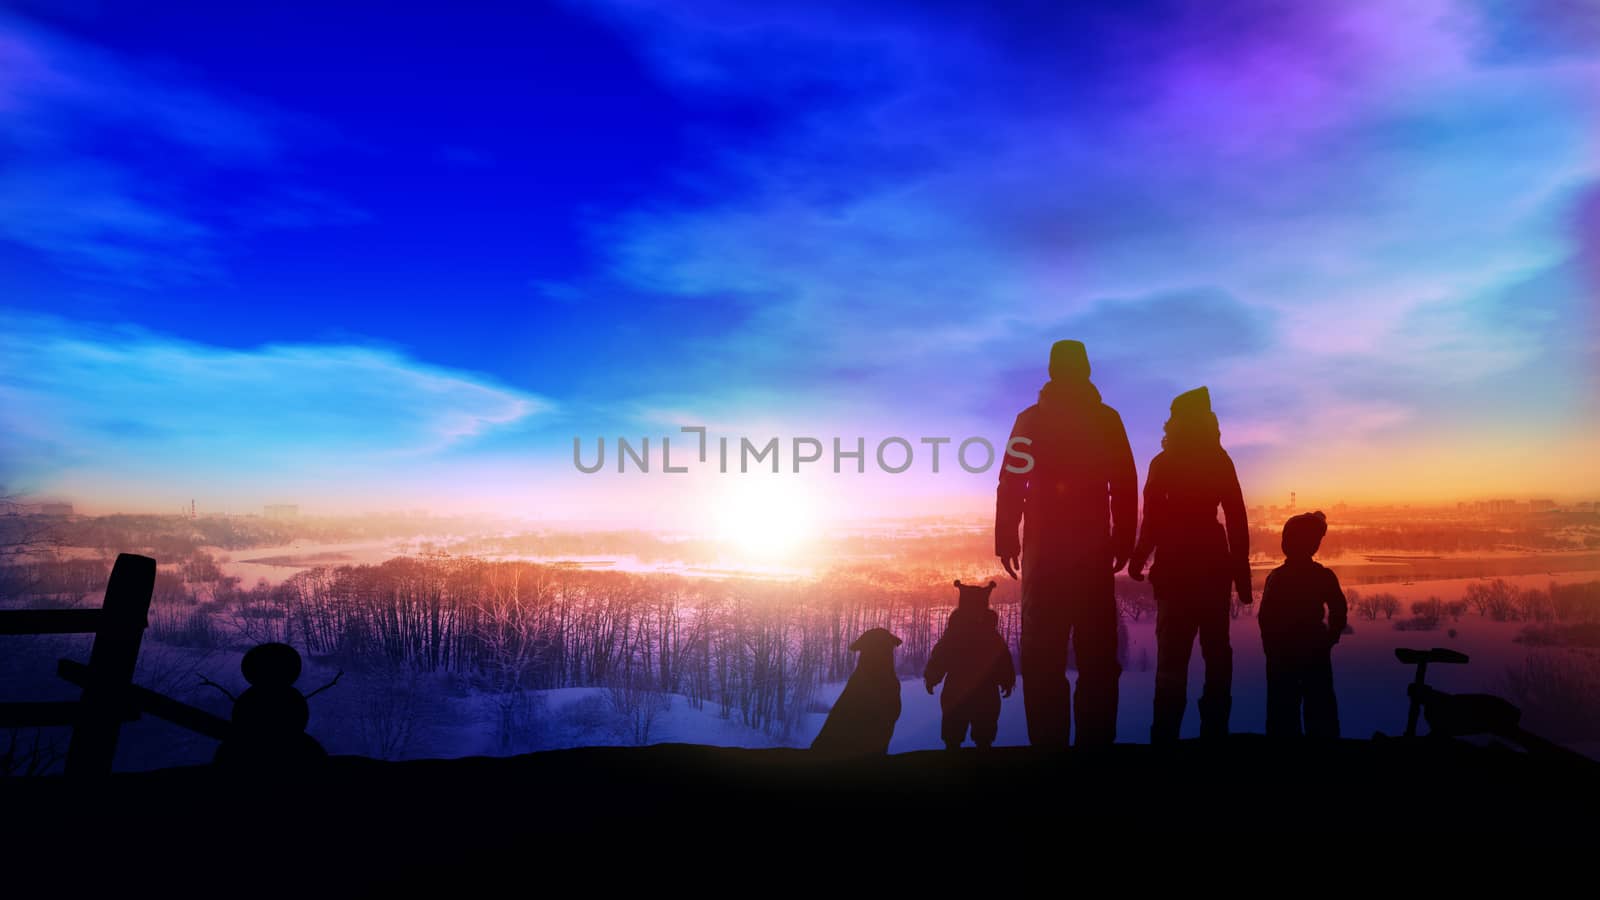 The family's silhouettes stand on a big winter slide opposite the setting sun.